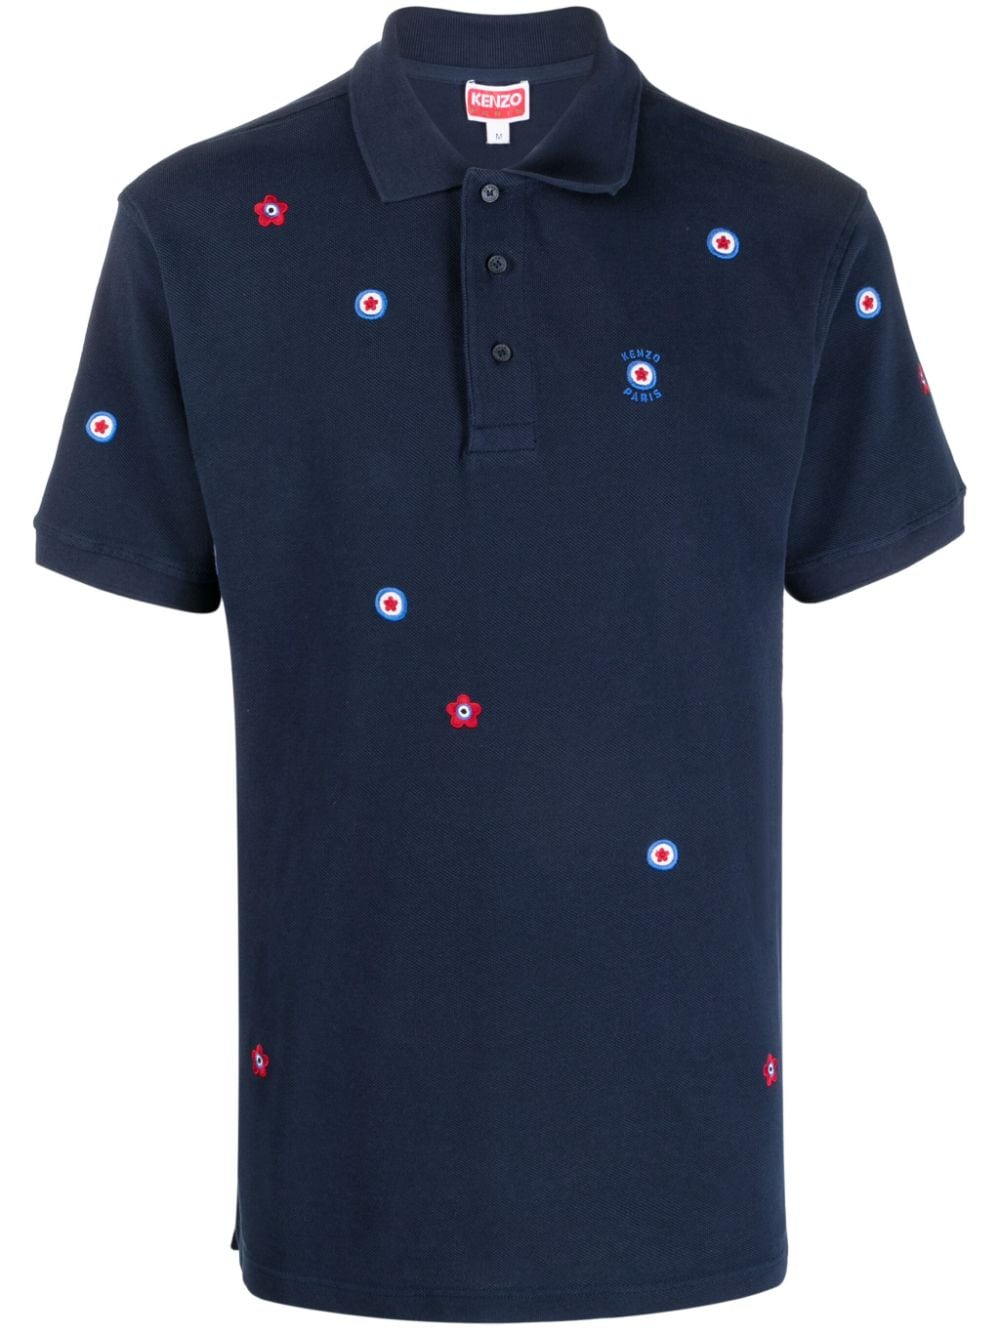 Target embroidered cotton shirt